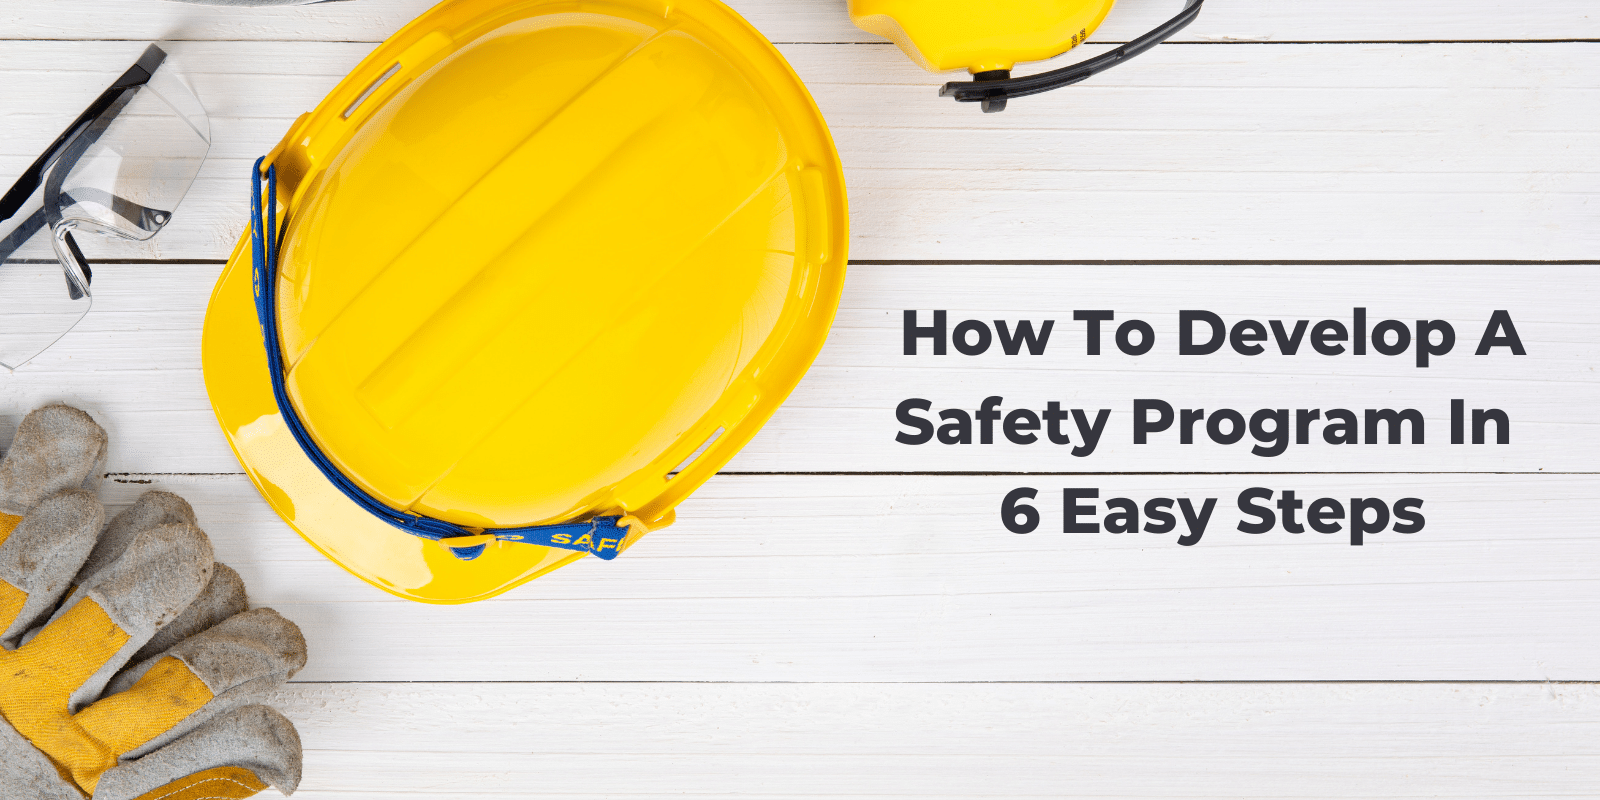 https://thethrivingsmallbusiness.com/wp-content/uploads/2015/05/How-To-Develop-a-Safety-Program-In-6-Easy-Steps-2.png